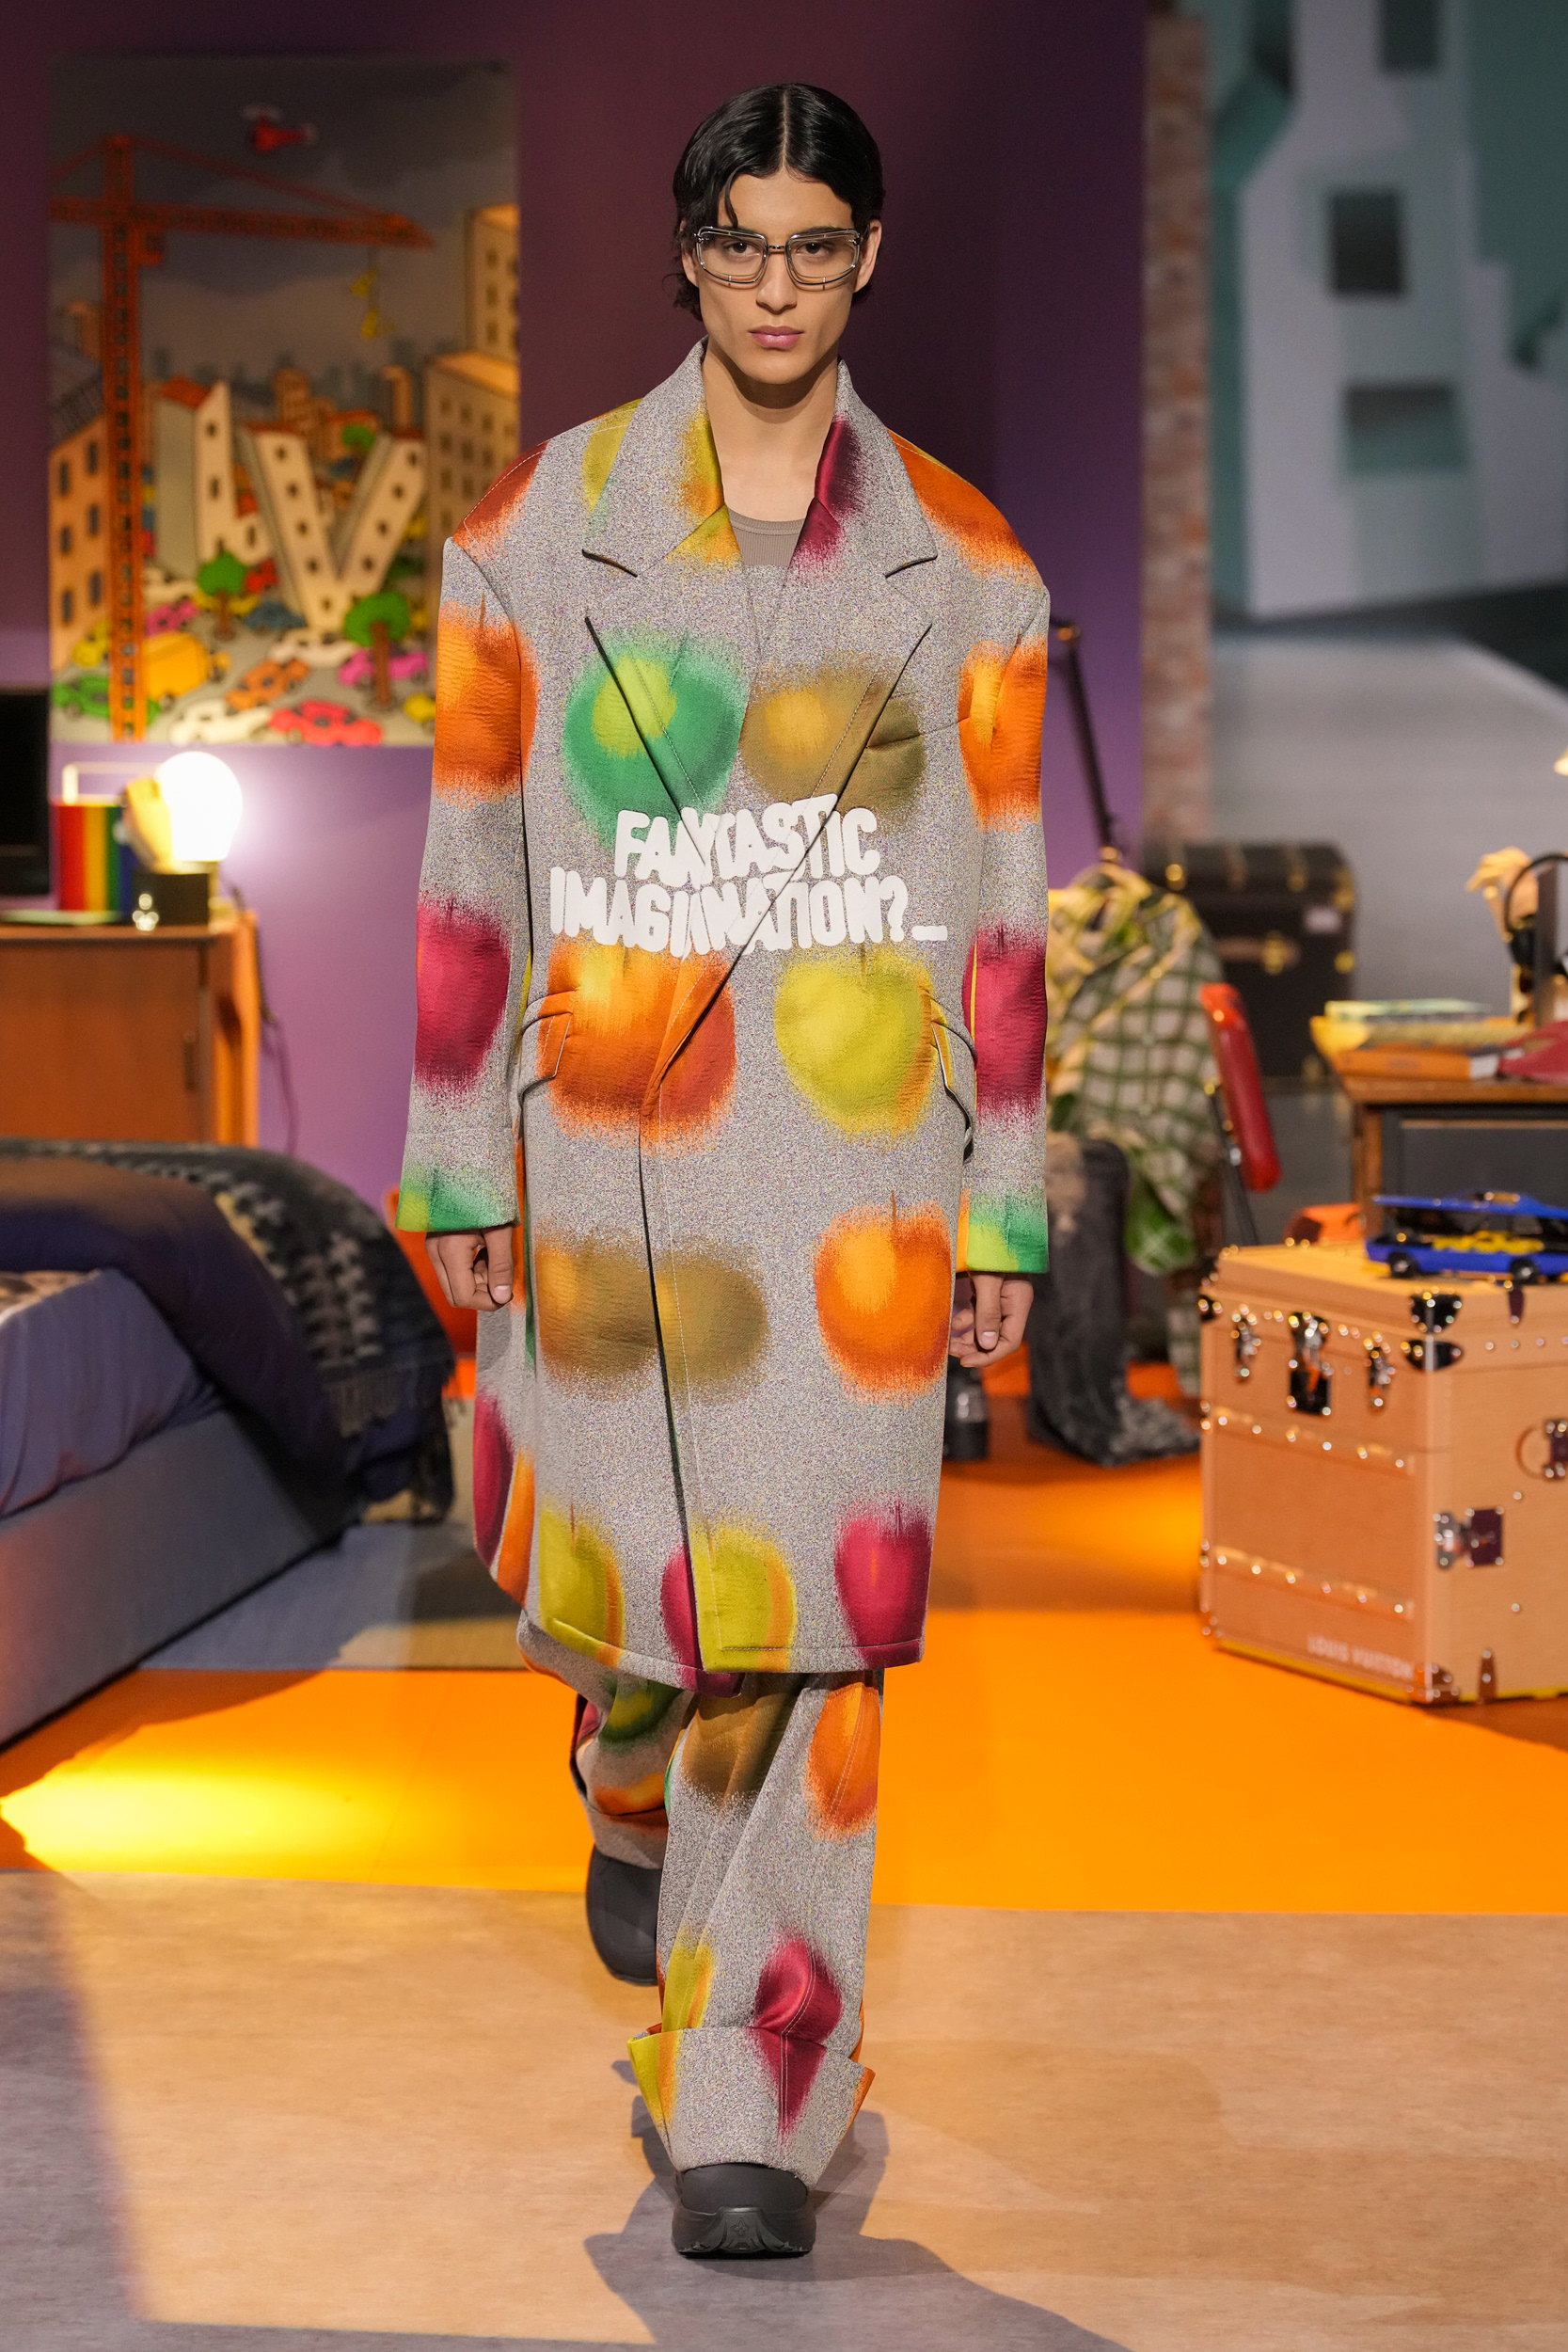 Louis Vuitton's colourful ode to the imaginary was soundtracked by